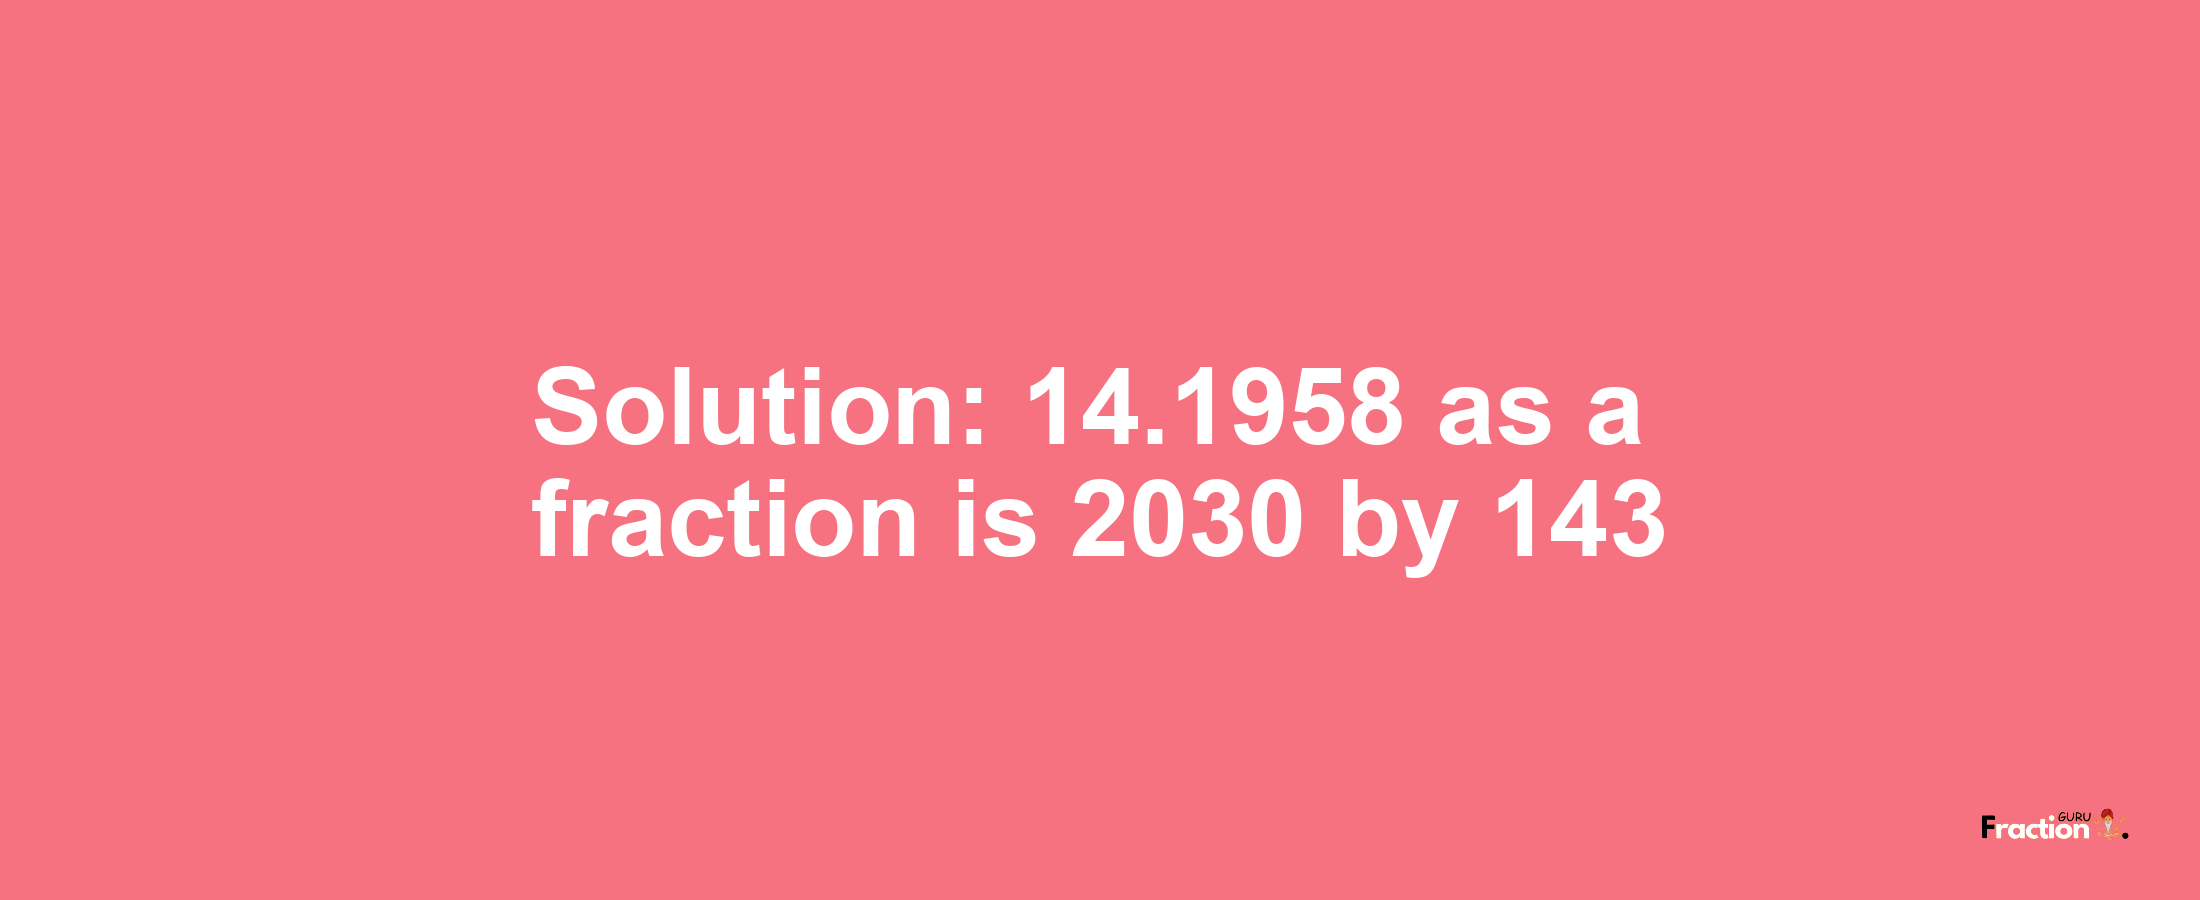 Solution:14.1958 as a fraction is 2030/143